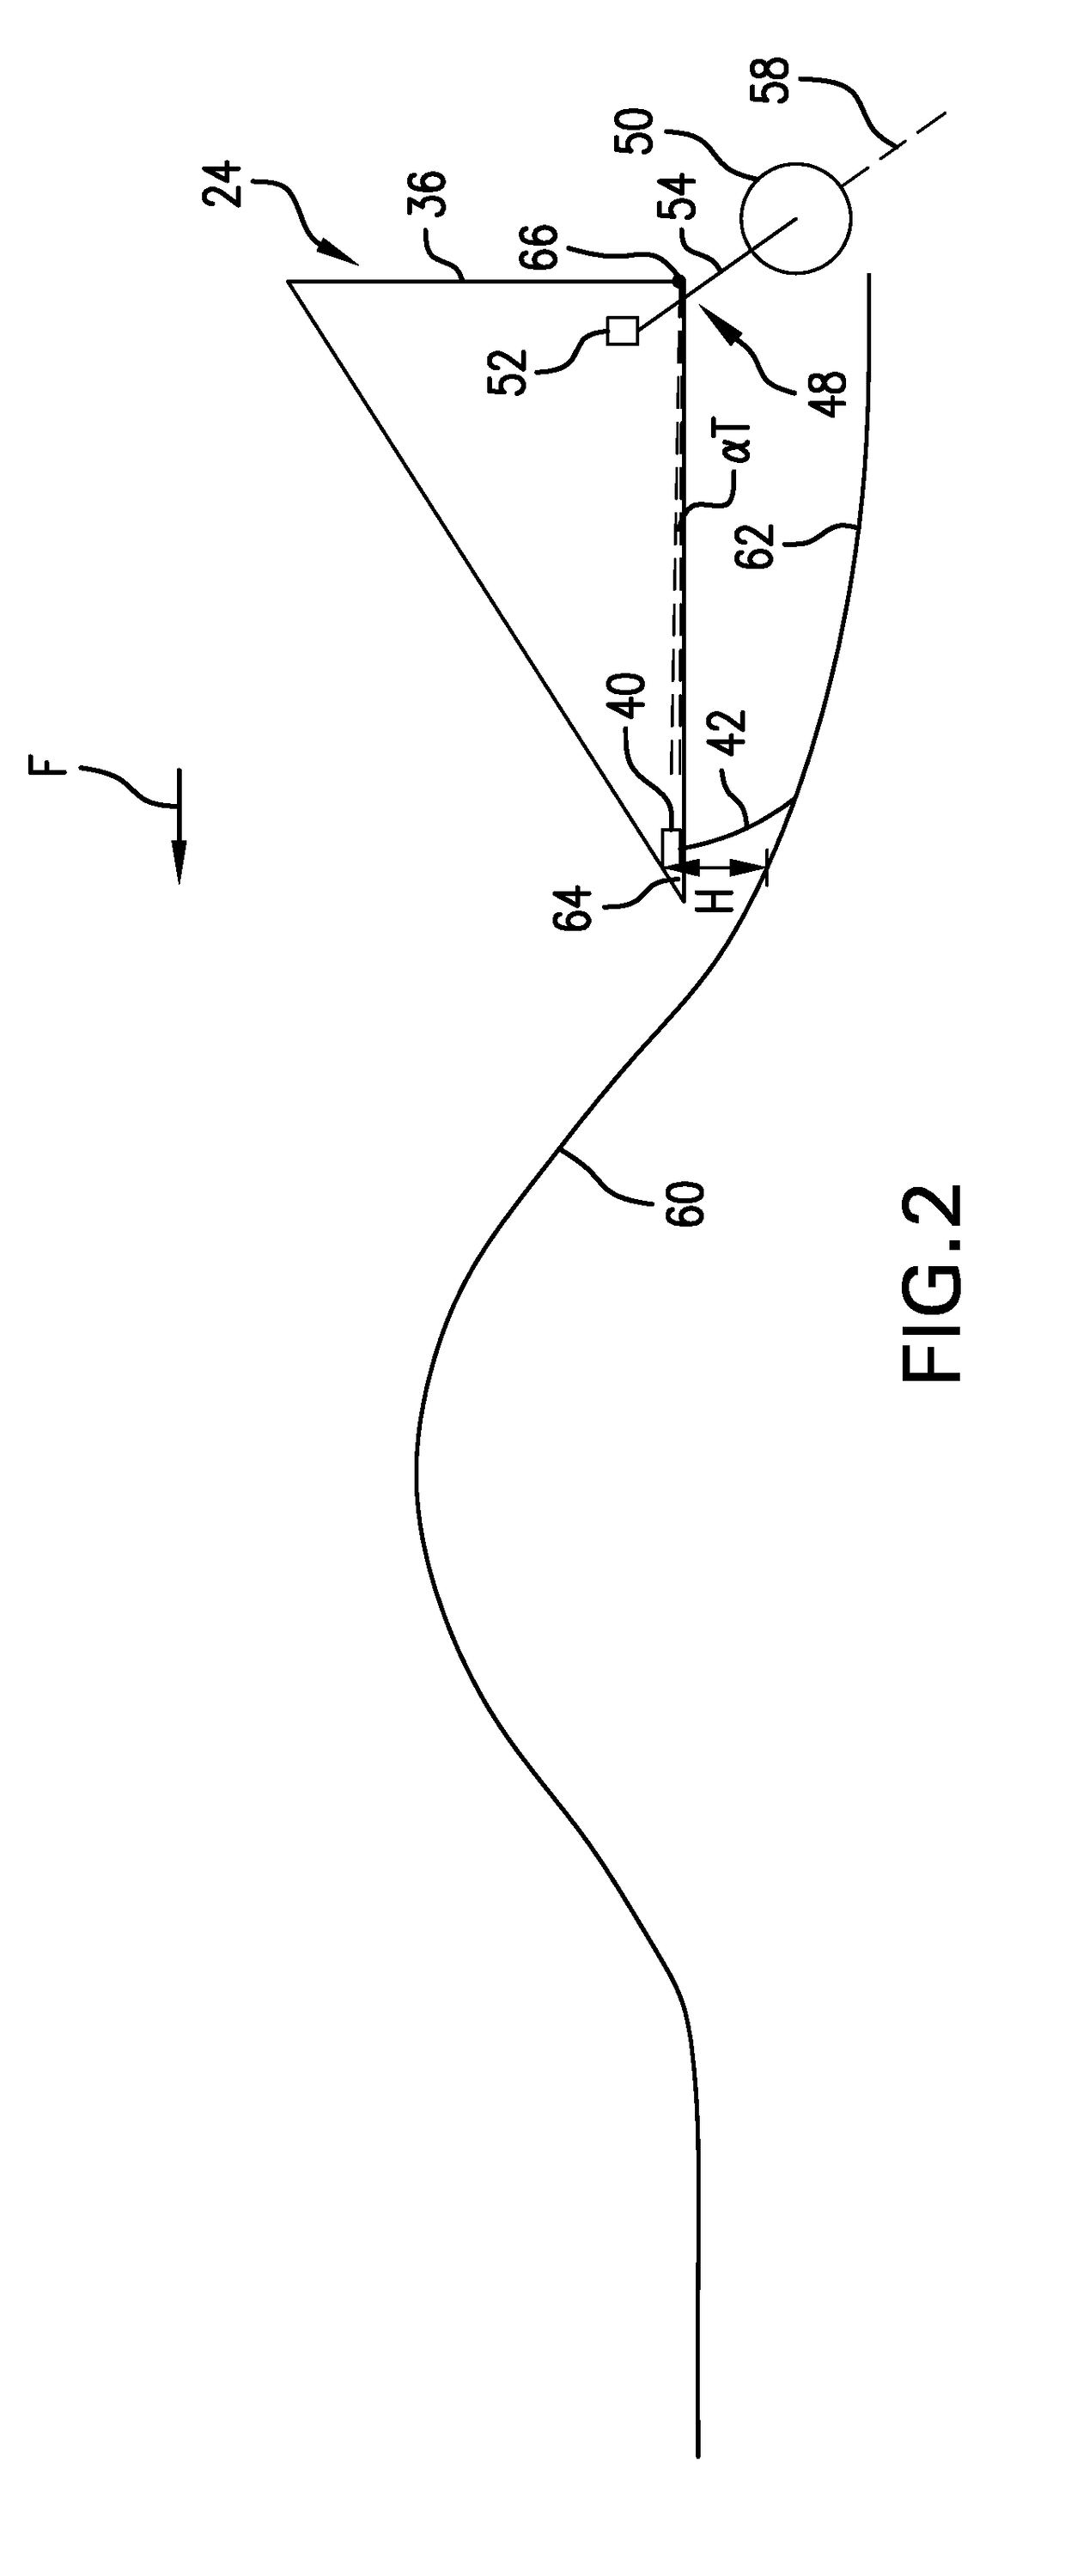 Header height control system with multiple height sensors